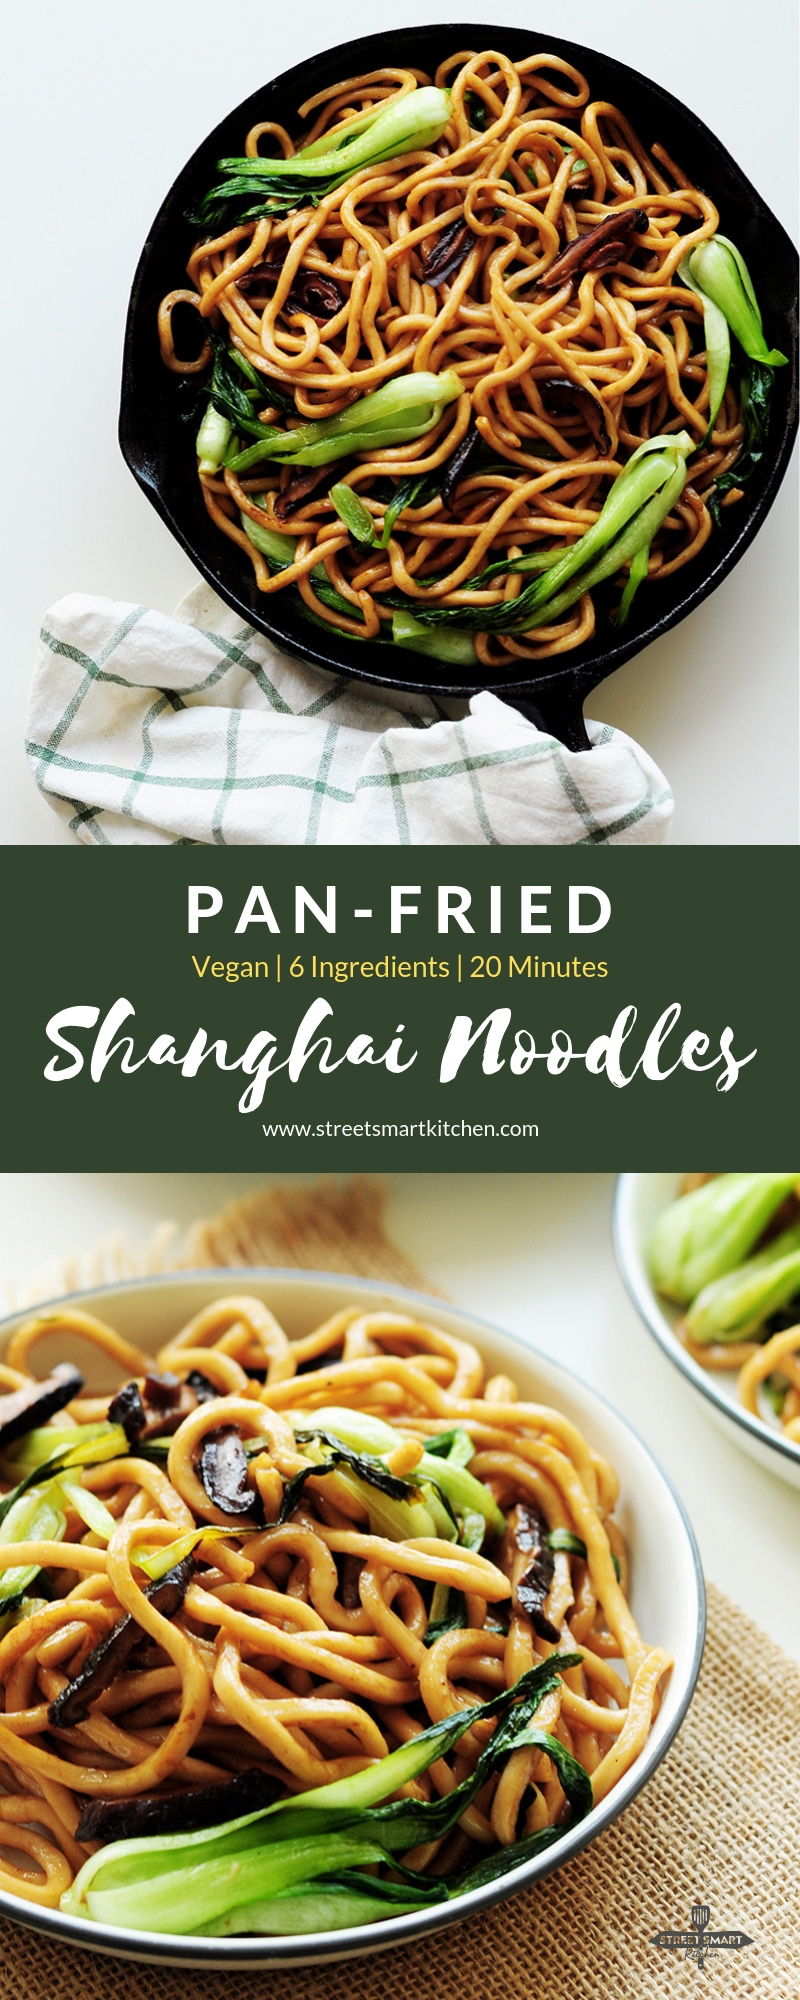 These pan-fried Shanghai noodles are perfect when all you want is to slurp some noodles. They're 100% vegan and require only 6 ingredients & 20 mins.